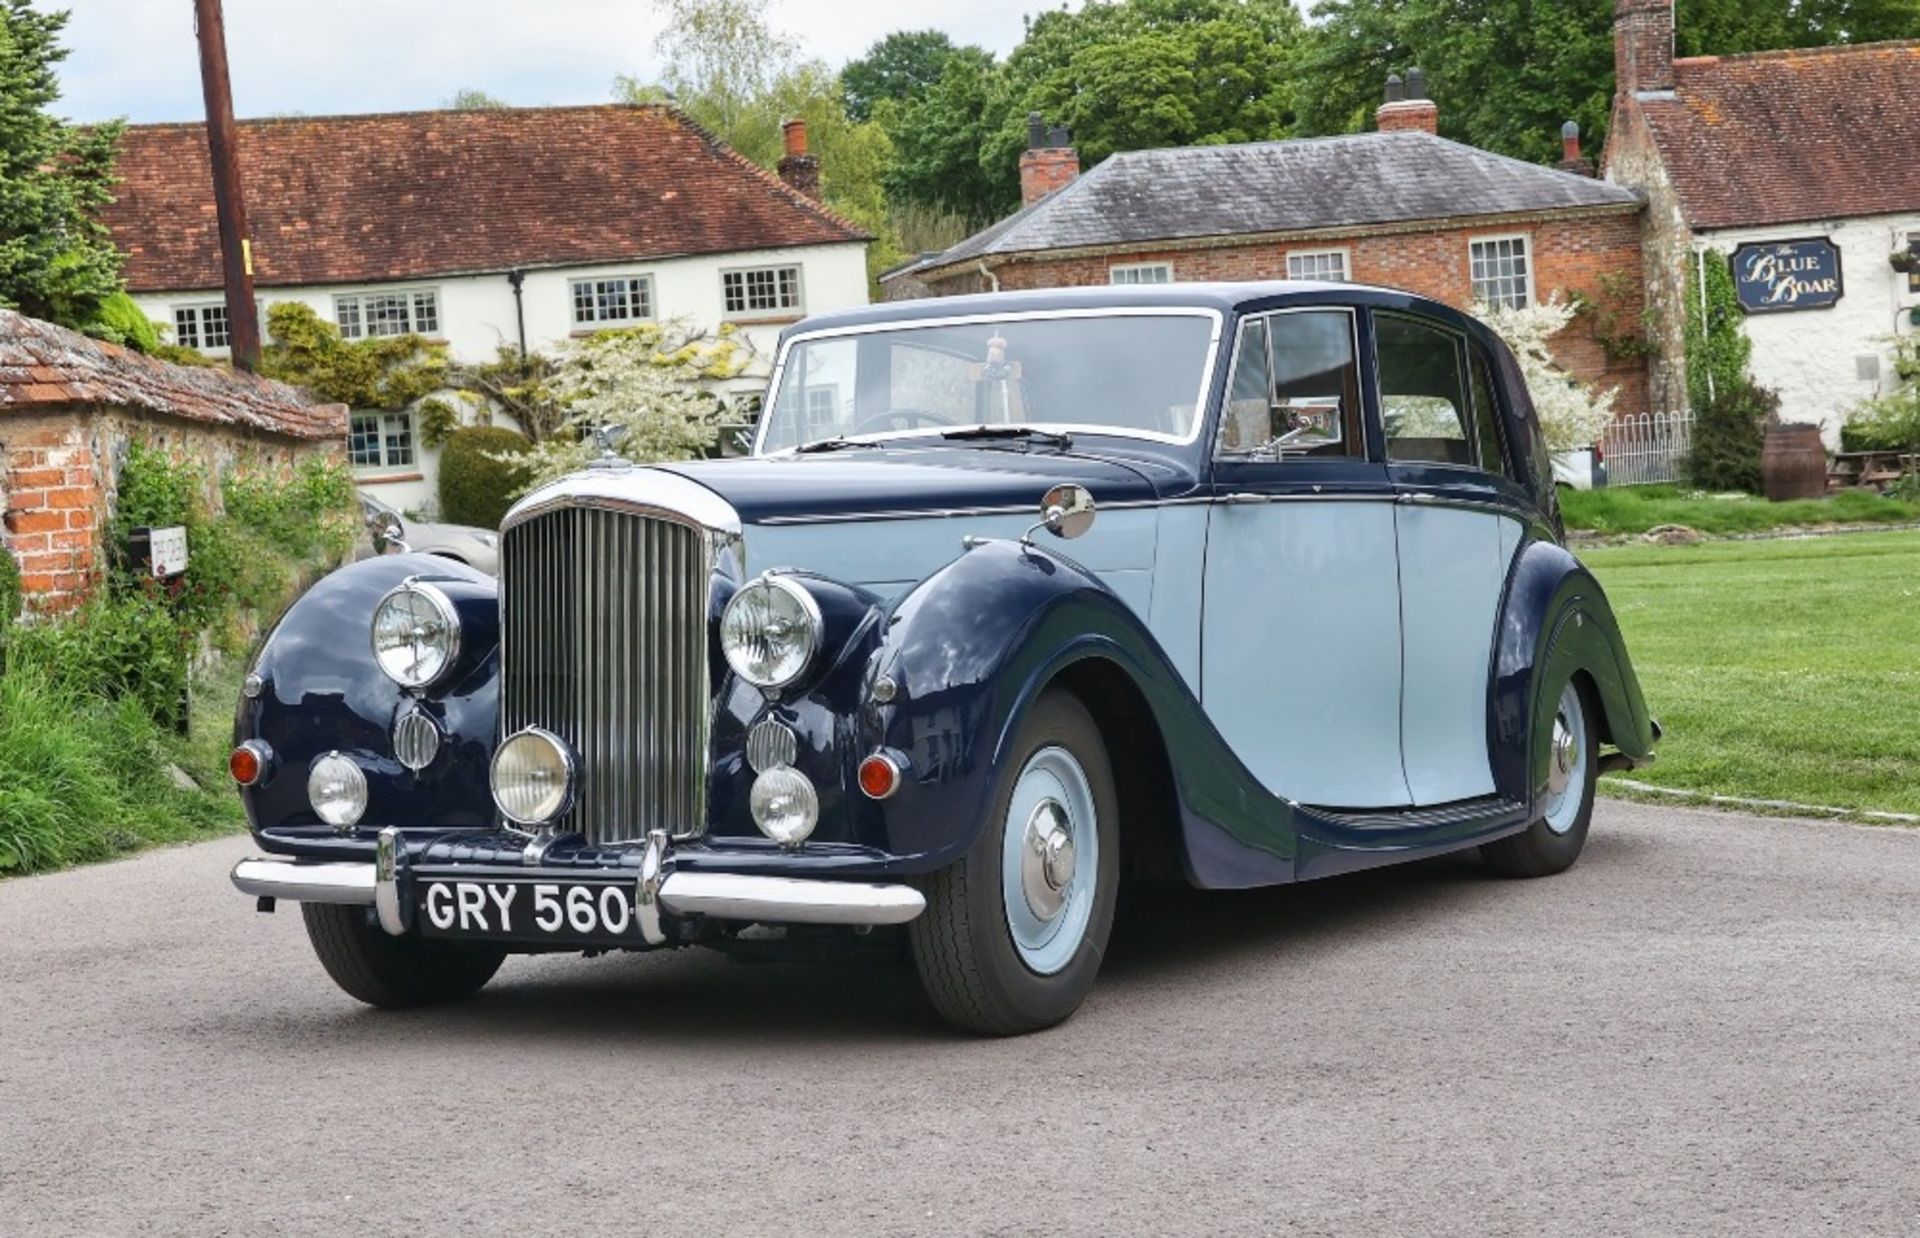 1950 BENTLEY MARK VI SIX LIGHT SALOON BY FREESTONE AND WEBB Registration Number: GRY 560 Chassis